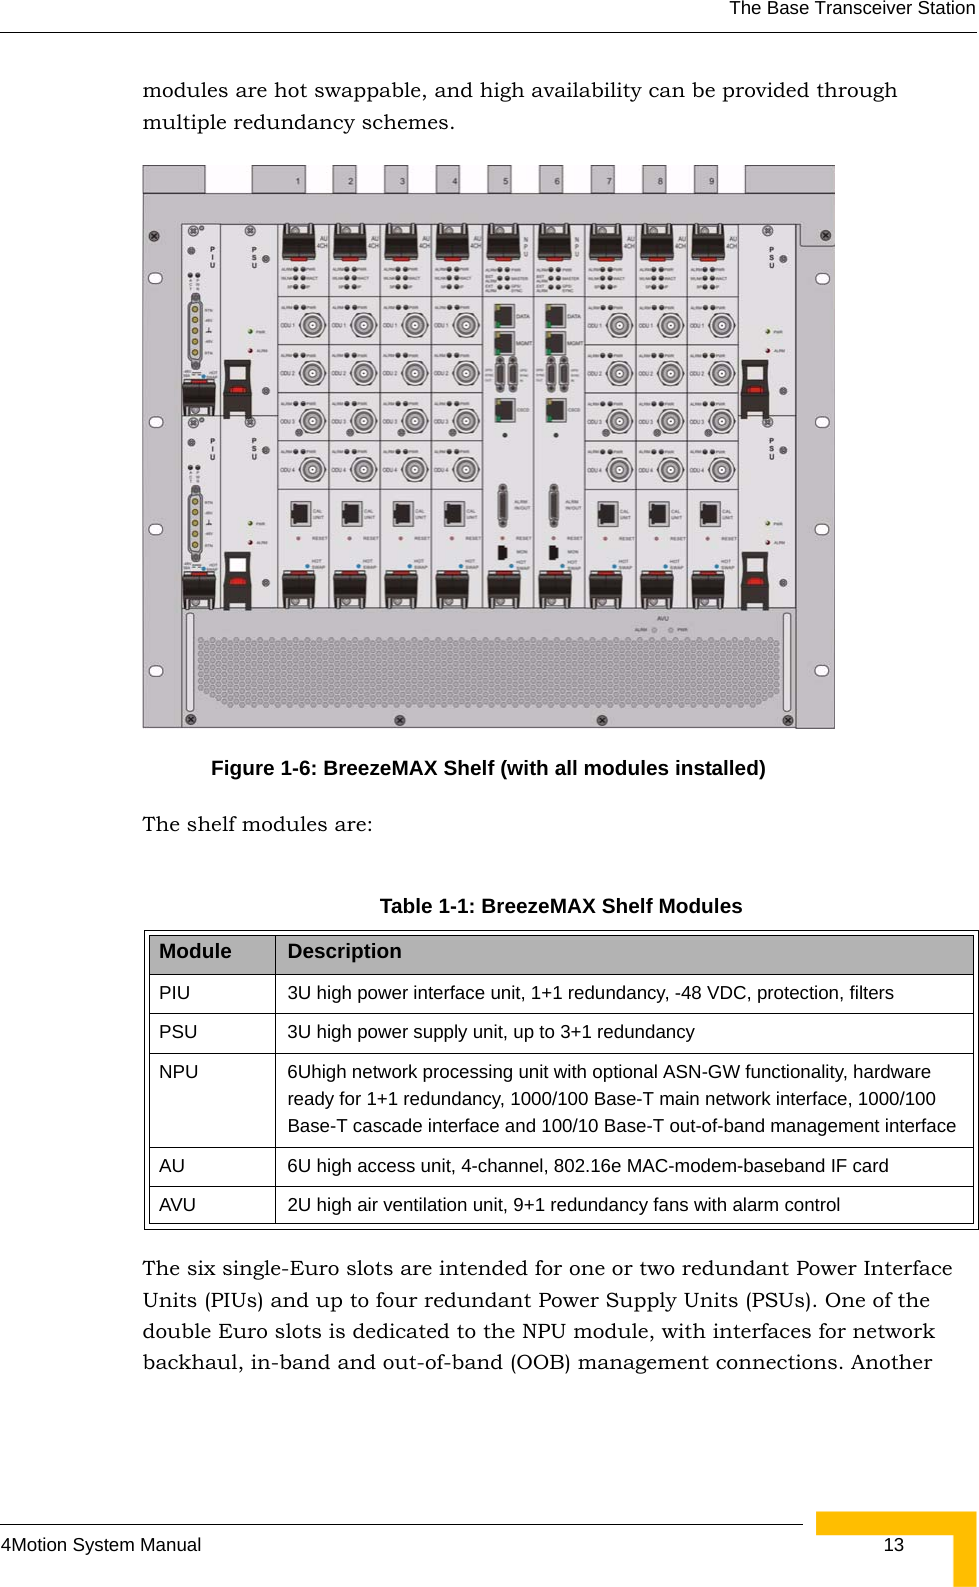 The Base Transceiver Station4Motion System Manual  13modules are hot swappable, and high availability can be provided through multiple redundancy schemes.The shelf modules are:The six single-Euro slots are intended for one or two redundant Power Interface Units (PIUs) and up to four redundant Power Supply Units (PSUs). One of the double Euro slots is dedicated to the NPU module, with interfaces for network backhaul, in-band and out-of-band (OOB) management connections. Another Figure 1-6: BreezeMAX Shelf (with all modules installed)Table 1-1: BreezeMAX Shelf ModulesModule DescriptionPIU 3U high power interface unit, 1+1 redundancy, -48VDC, protection, filtersPSU 3U high power supply unit, up to 3+1 redundancyNPU 6Uhigh network processing unit with optional ASN-GW functionality, hardware ready for 1+1 redundancy, 1000/100 Base-T main network interface, 1000/100 Base-T cascade interface and 100/10 Base-T out-of-band management interfaceAU 6U high access unit, 4-channel, 802.16e MAC-modem-baseband IF cardAVU 2U high air ventilation unit, 9+1 redundancy fans with alarm control